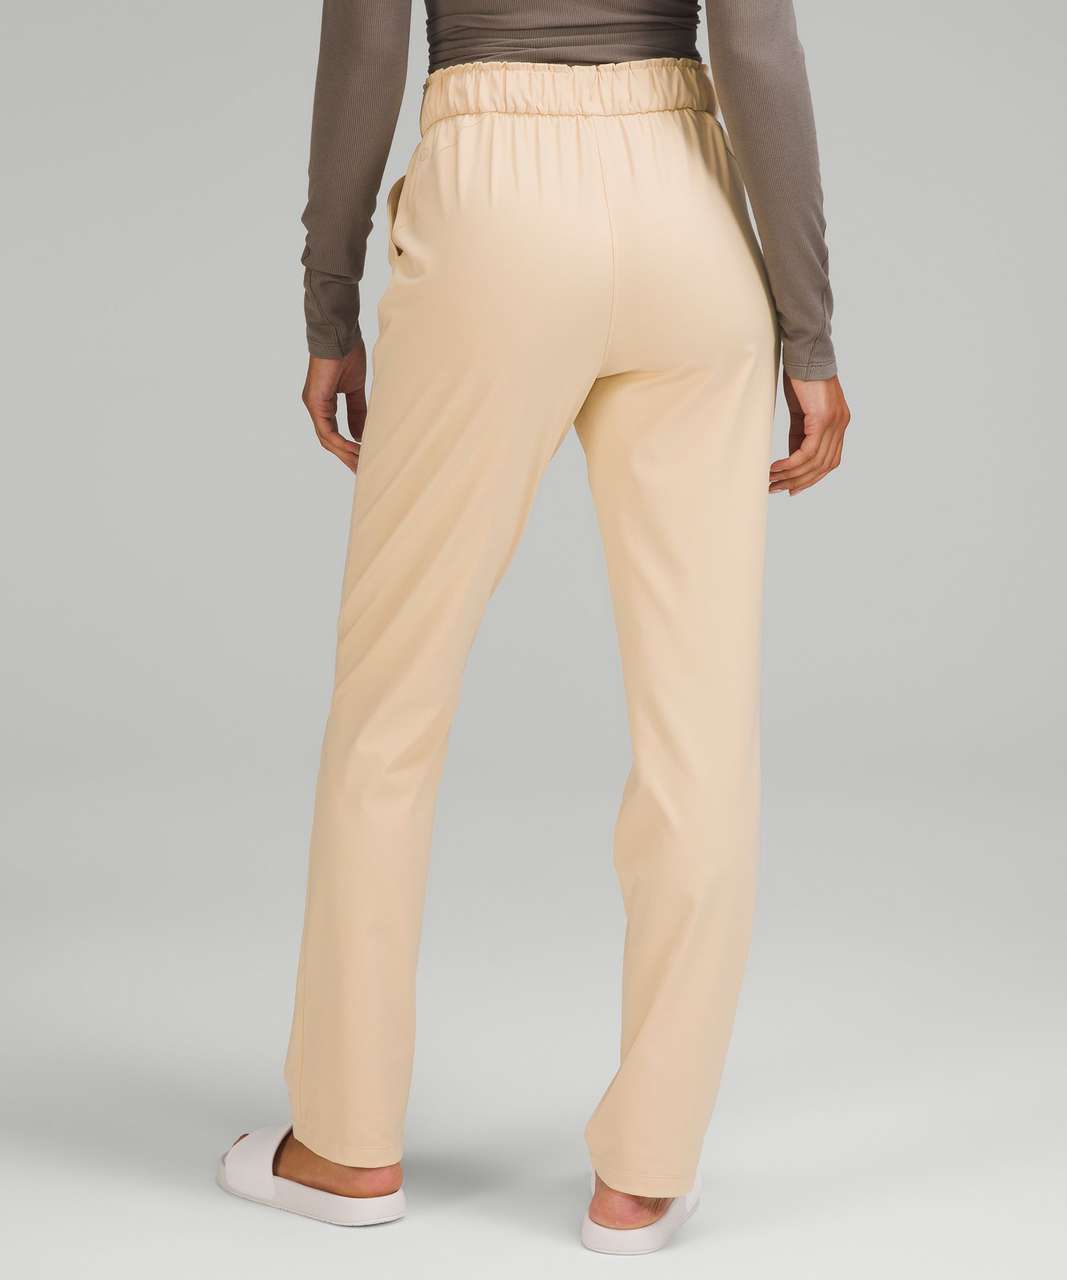 lululemon athletica Stretch Casual Pants for Women